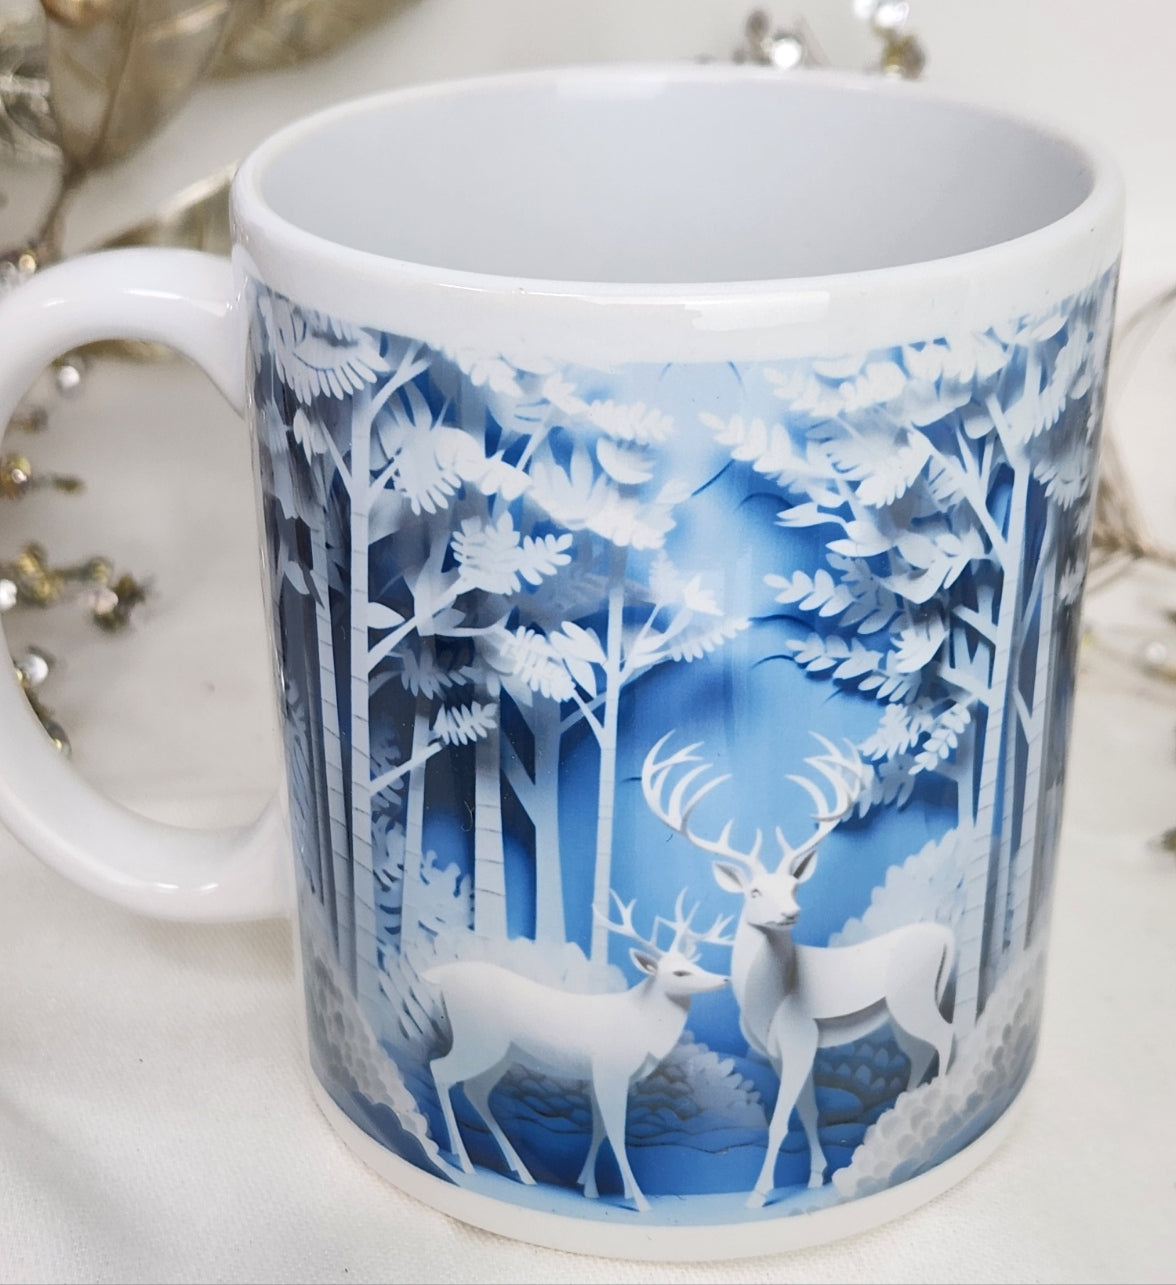 Deer in Snowy Forest Customize Option Sublimated Mugs 11 oz & 15 oz